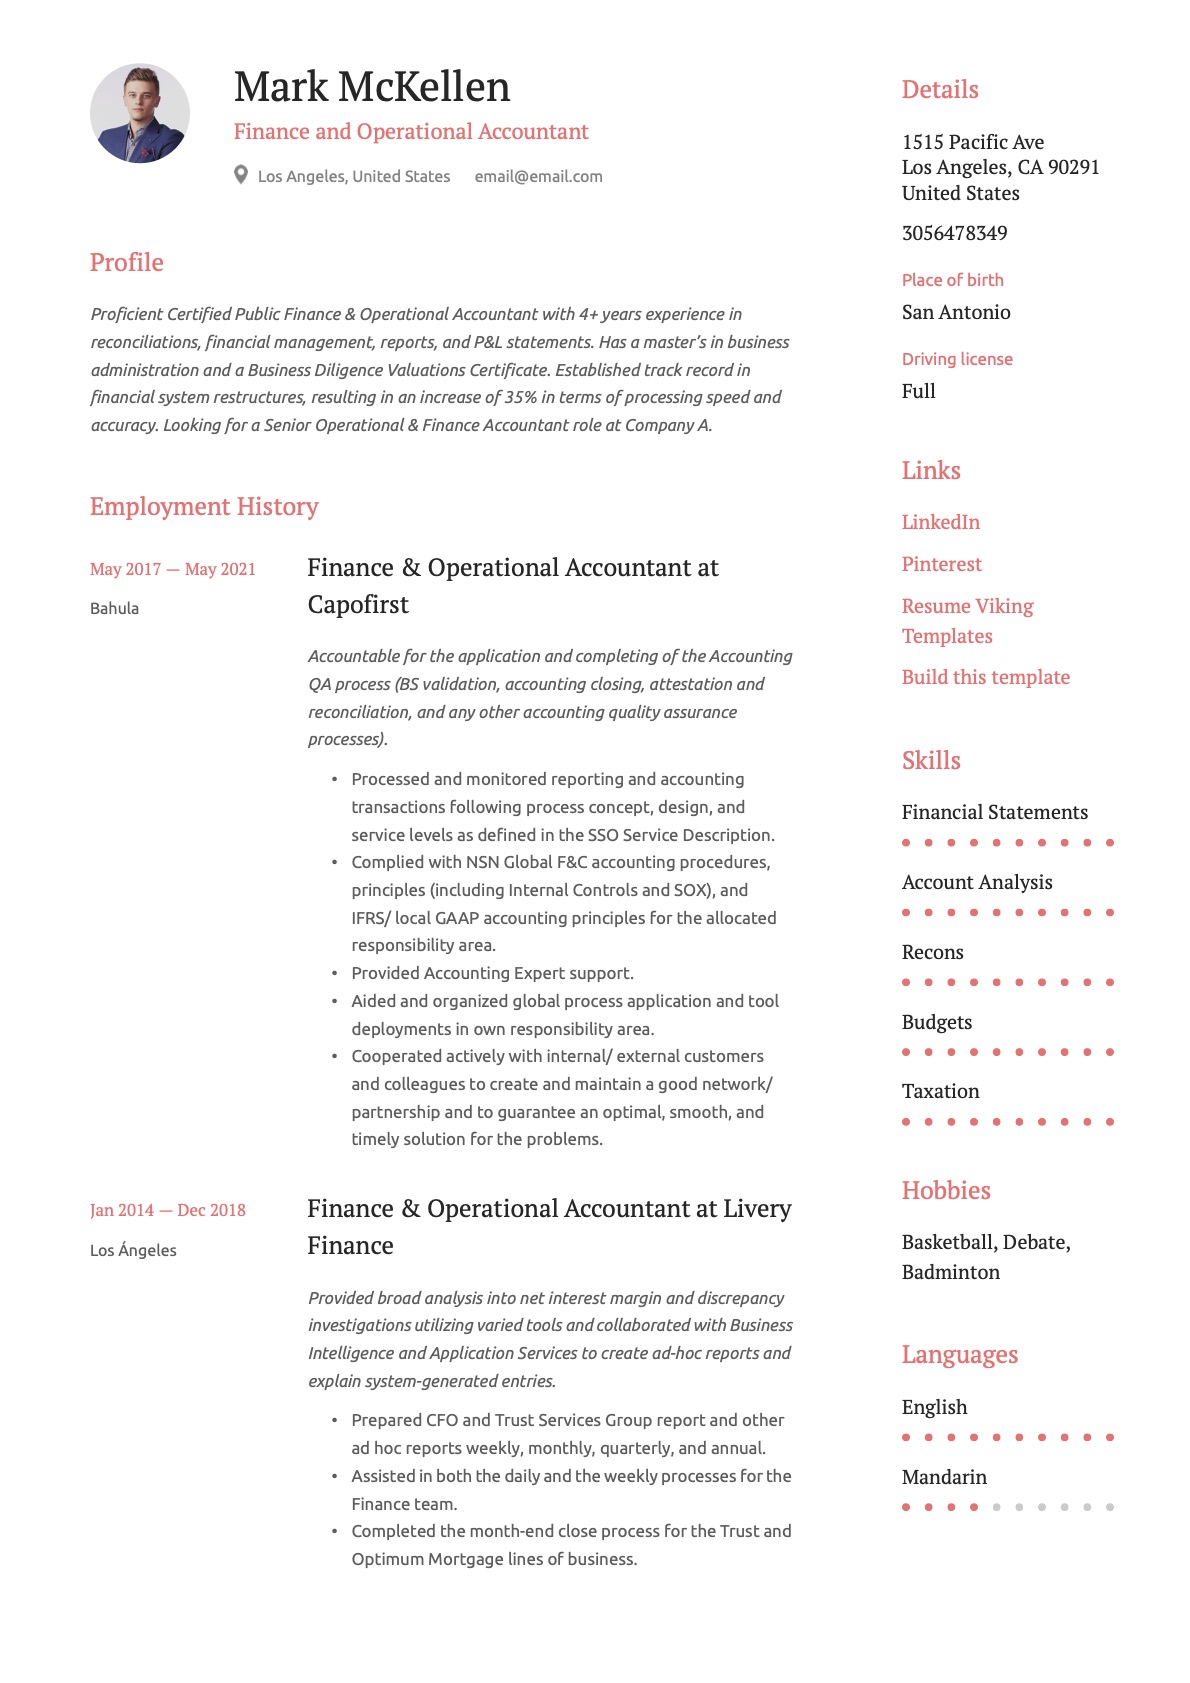 Finance & Operational Accountant Resume Example